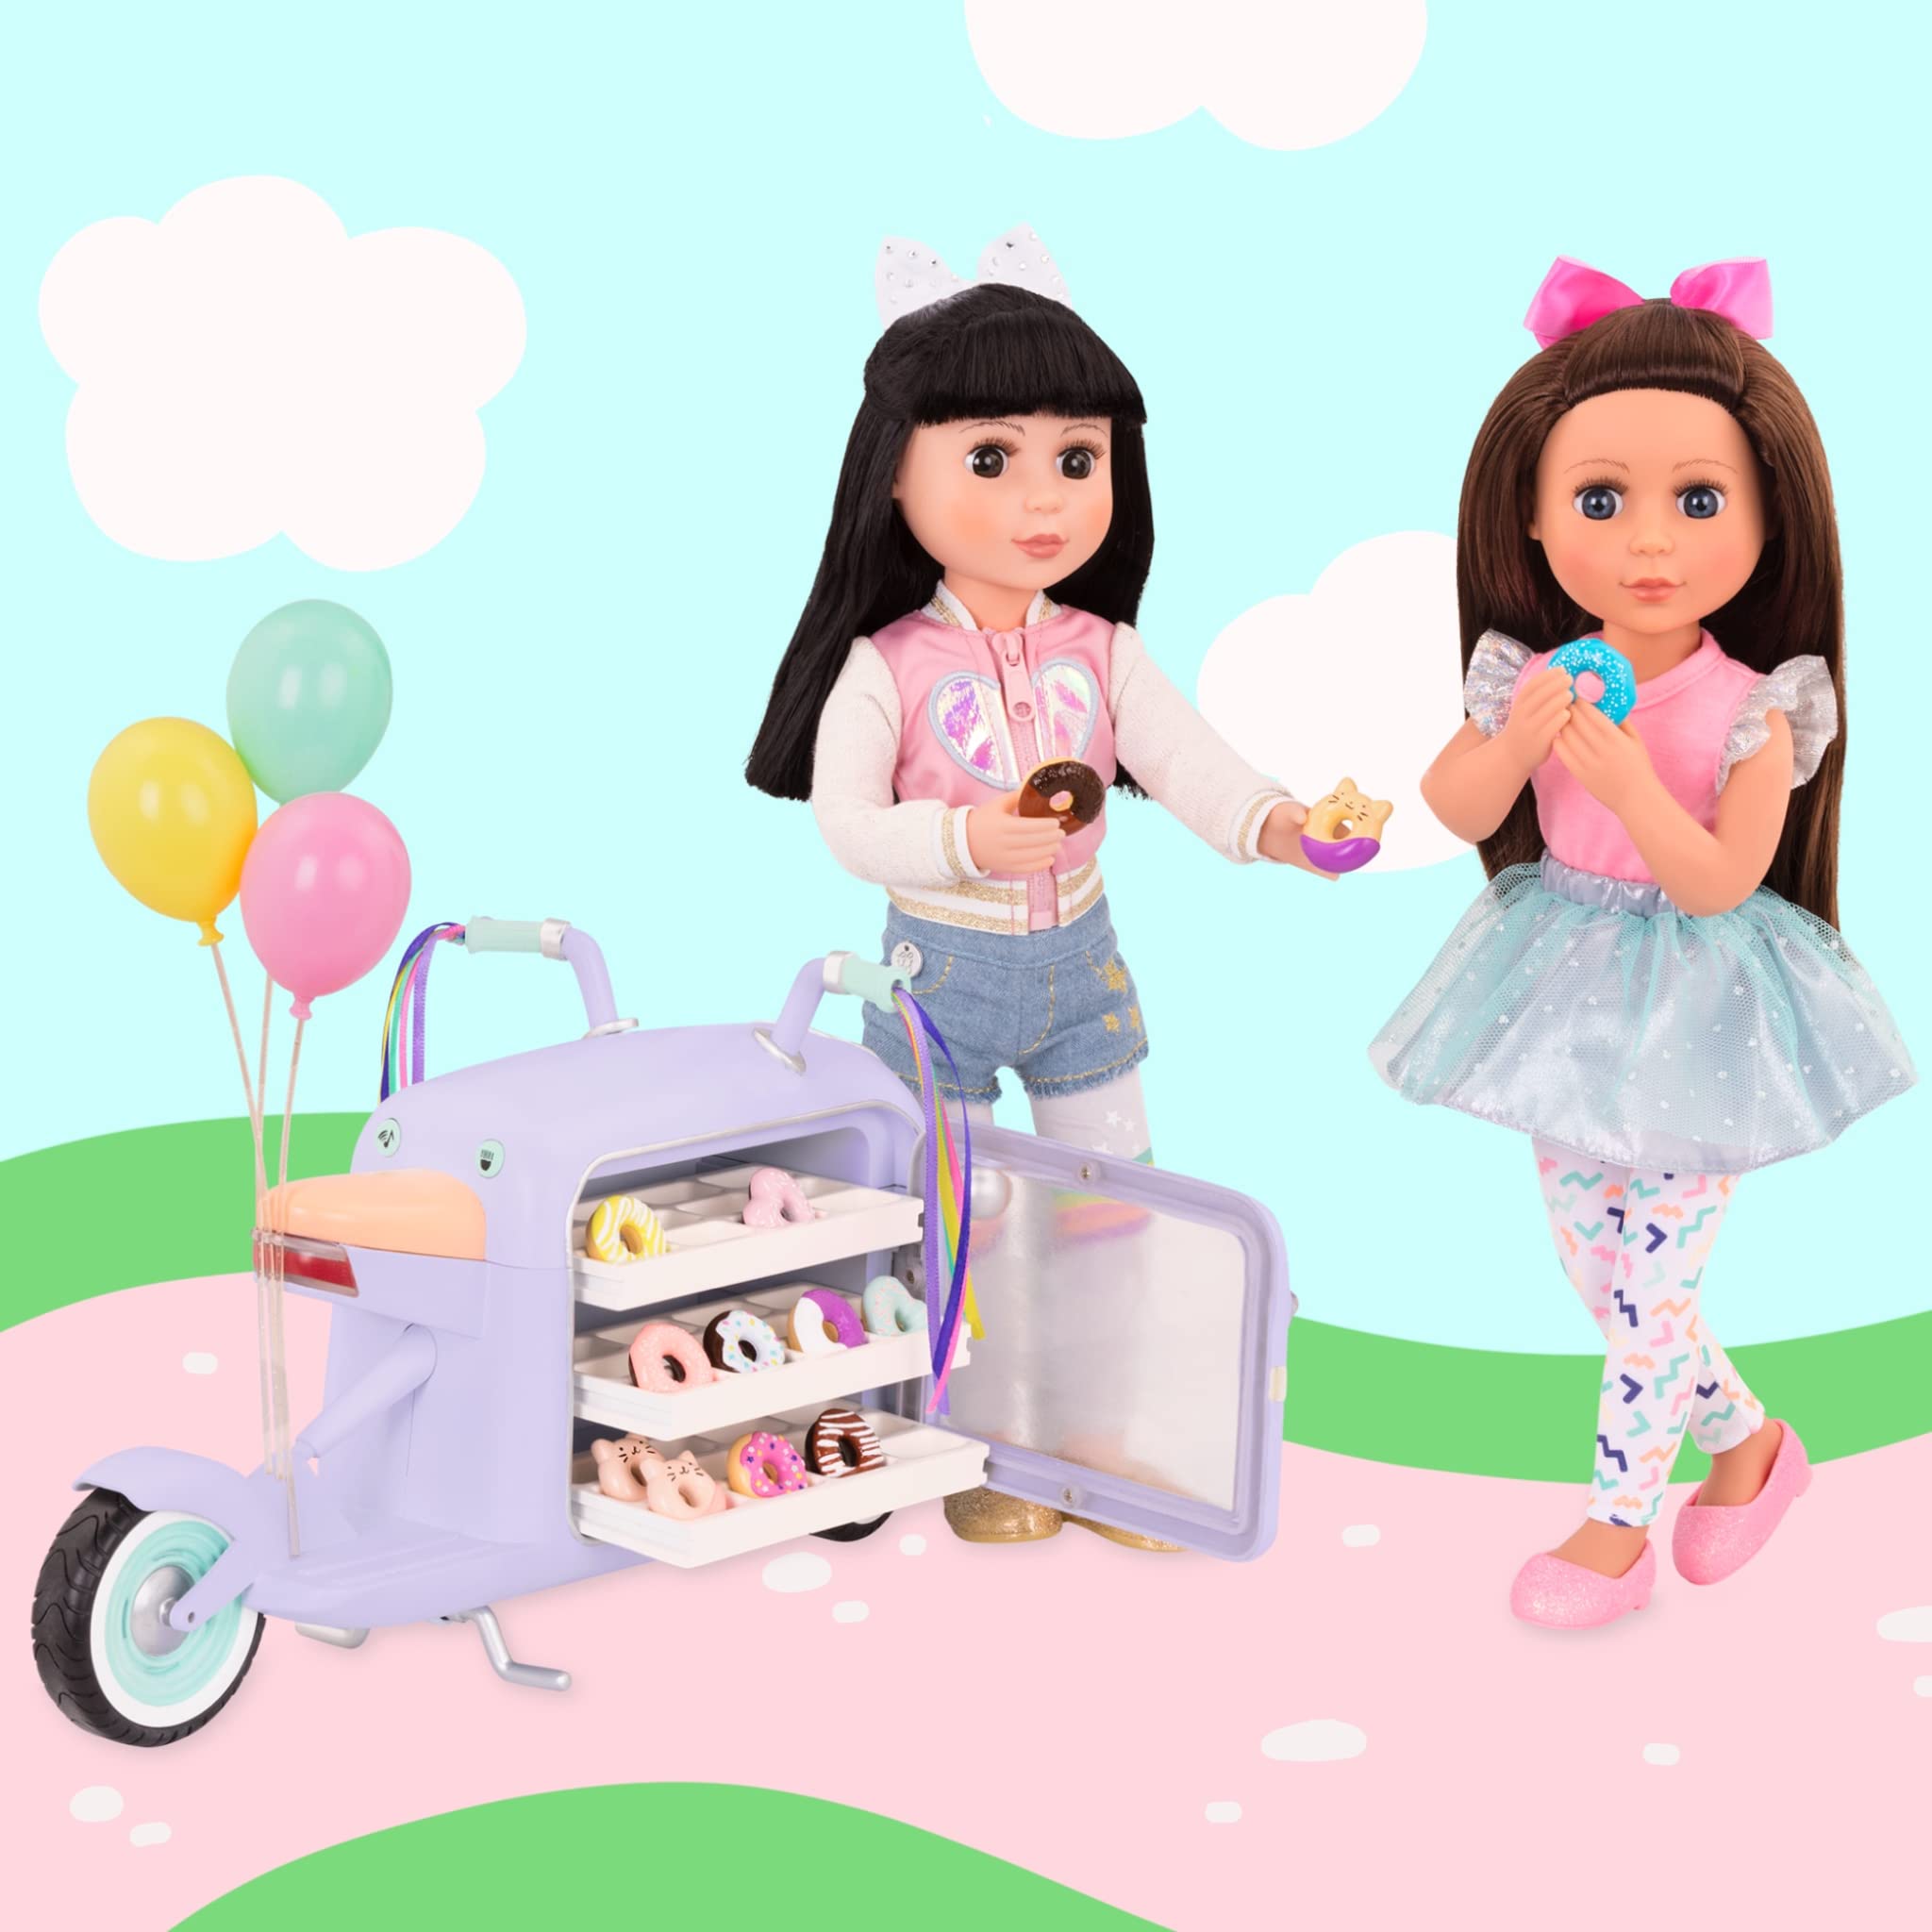 Glitter Girls by Battat – Donut Delivery Scooter – Toy Car, Bike, and Vehicle Accessories for 14-inch Dolls – Ages 3 and Up (GG57020C1Z) , Pink